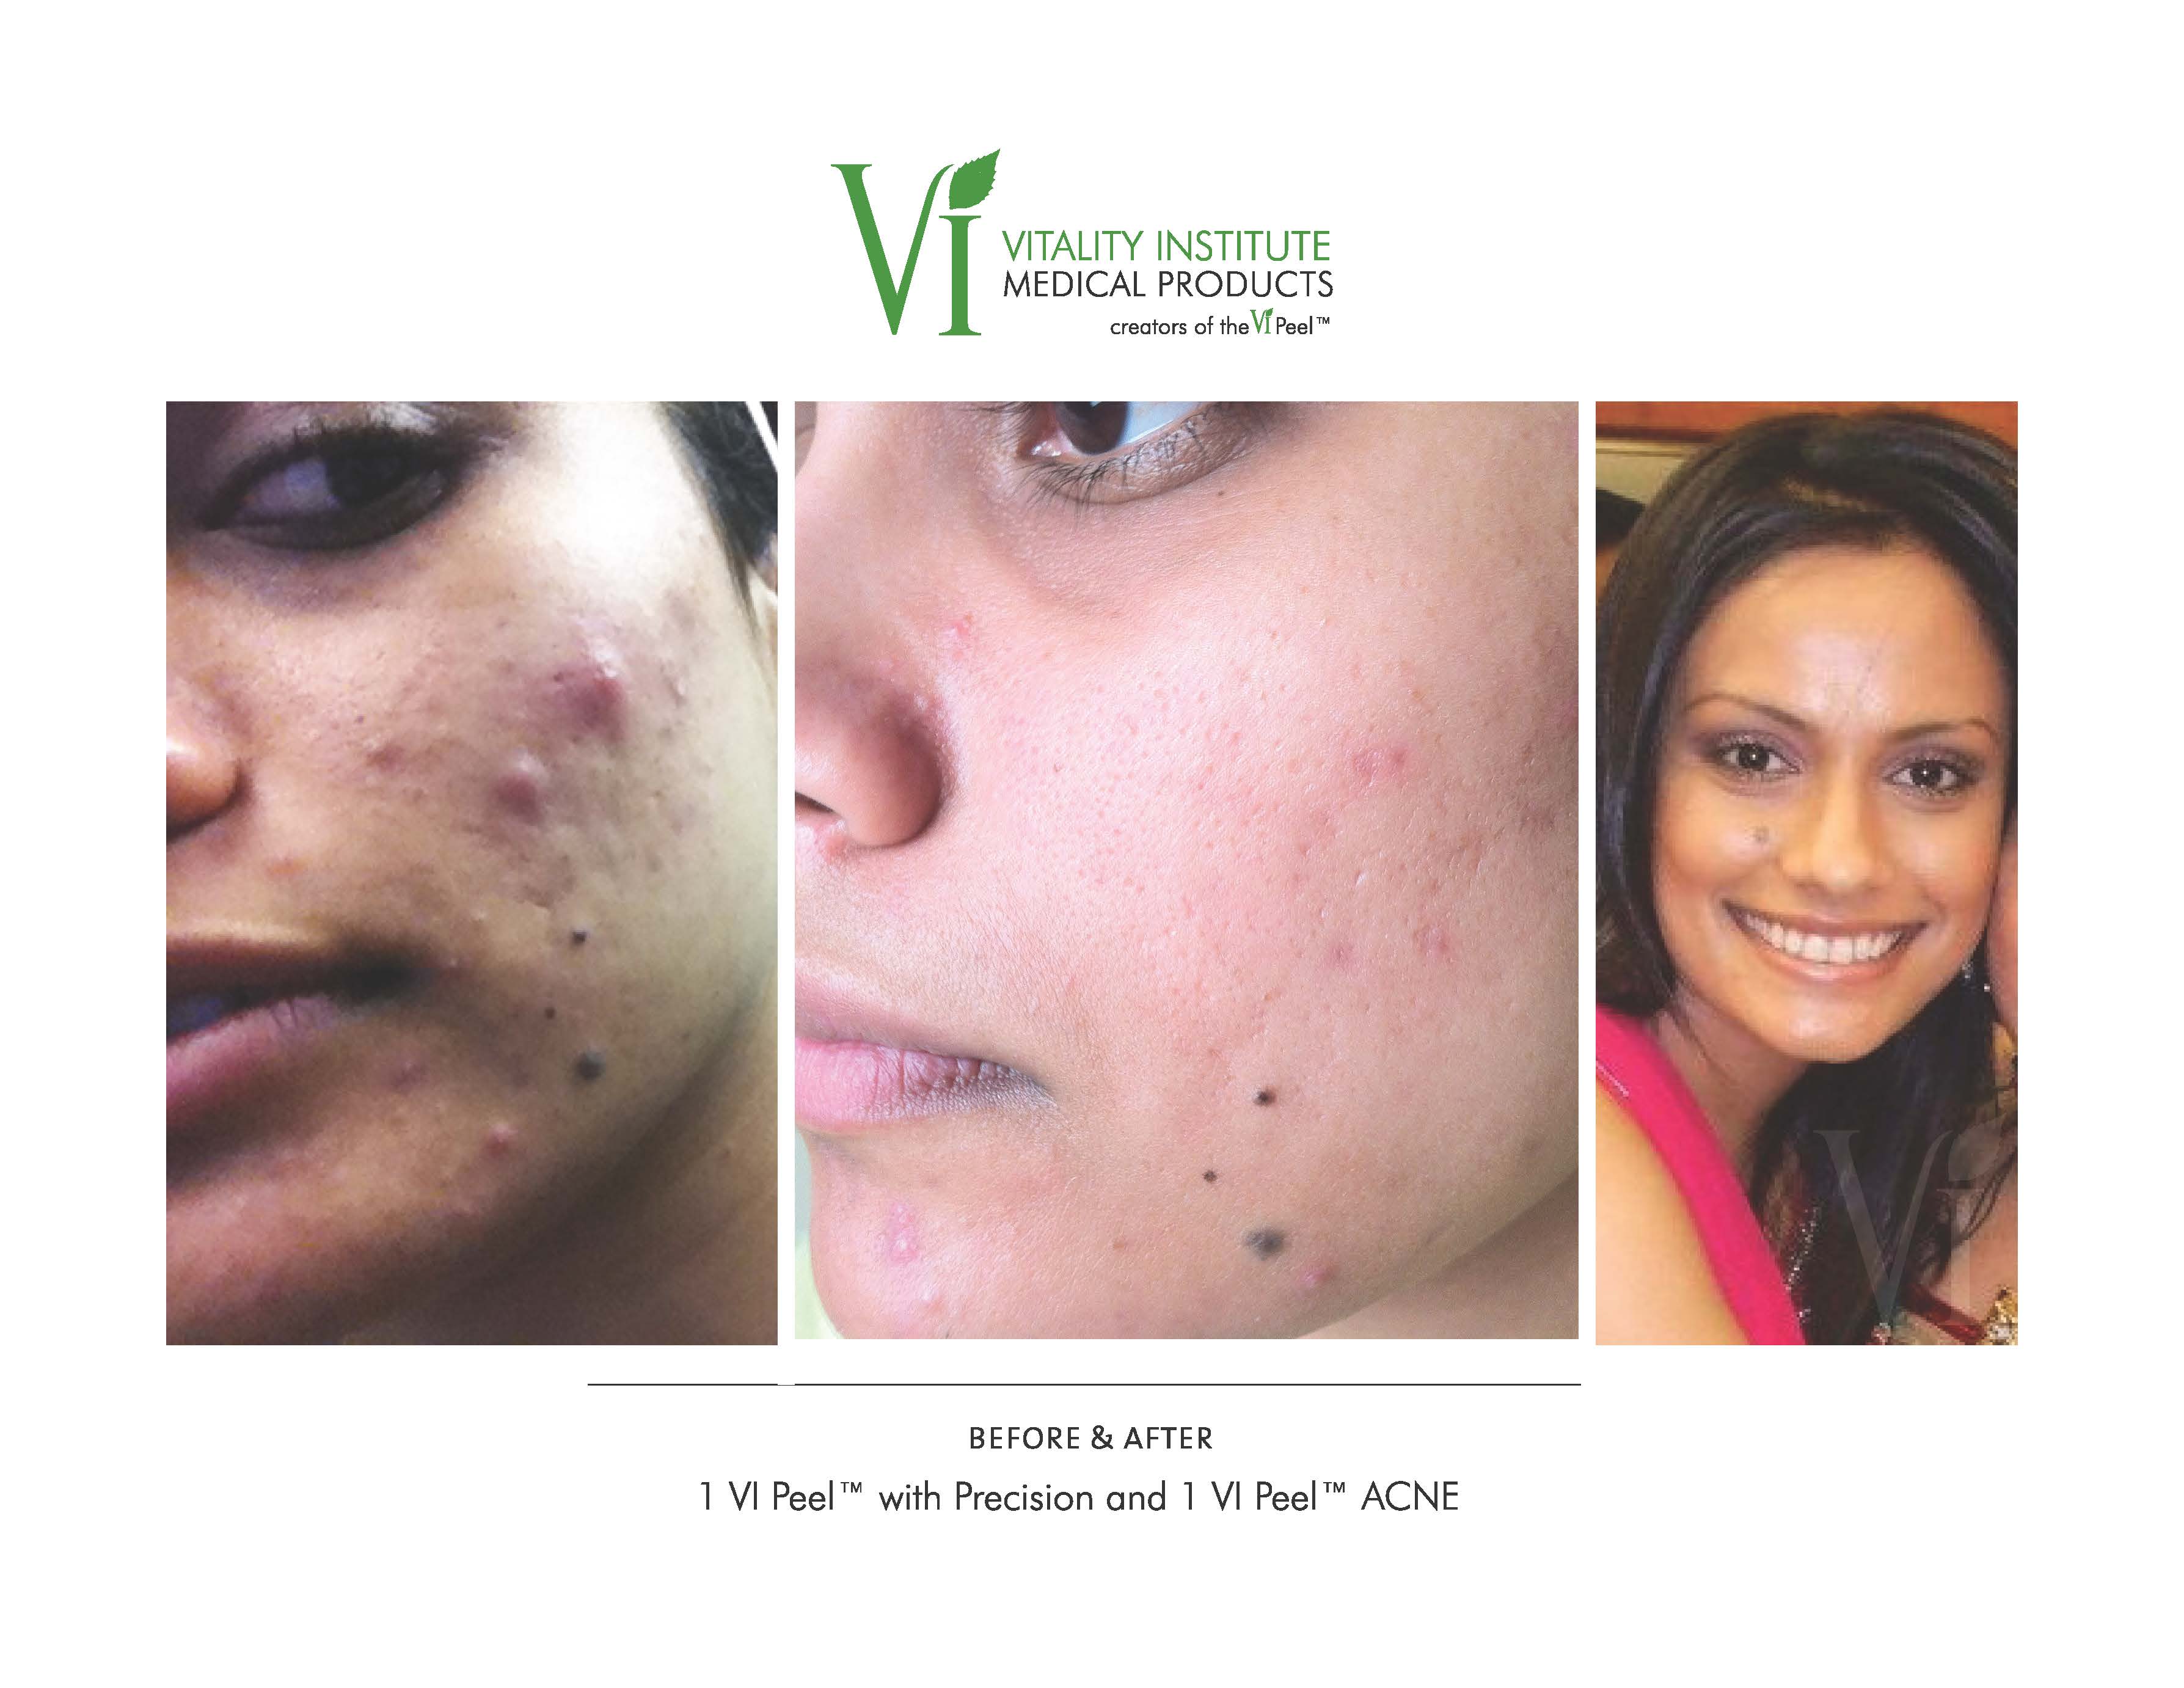 VI Peel Before and After Precision and Acne Southfield MI